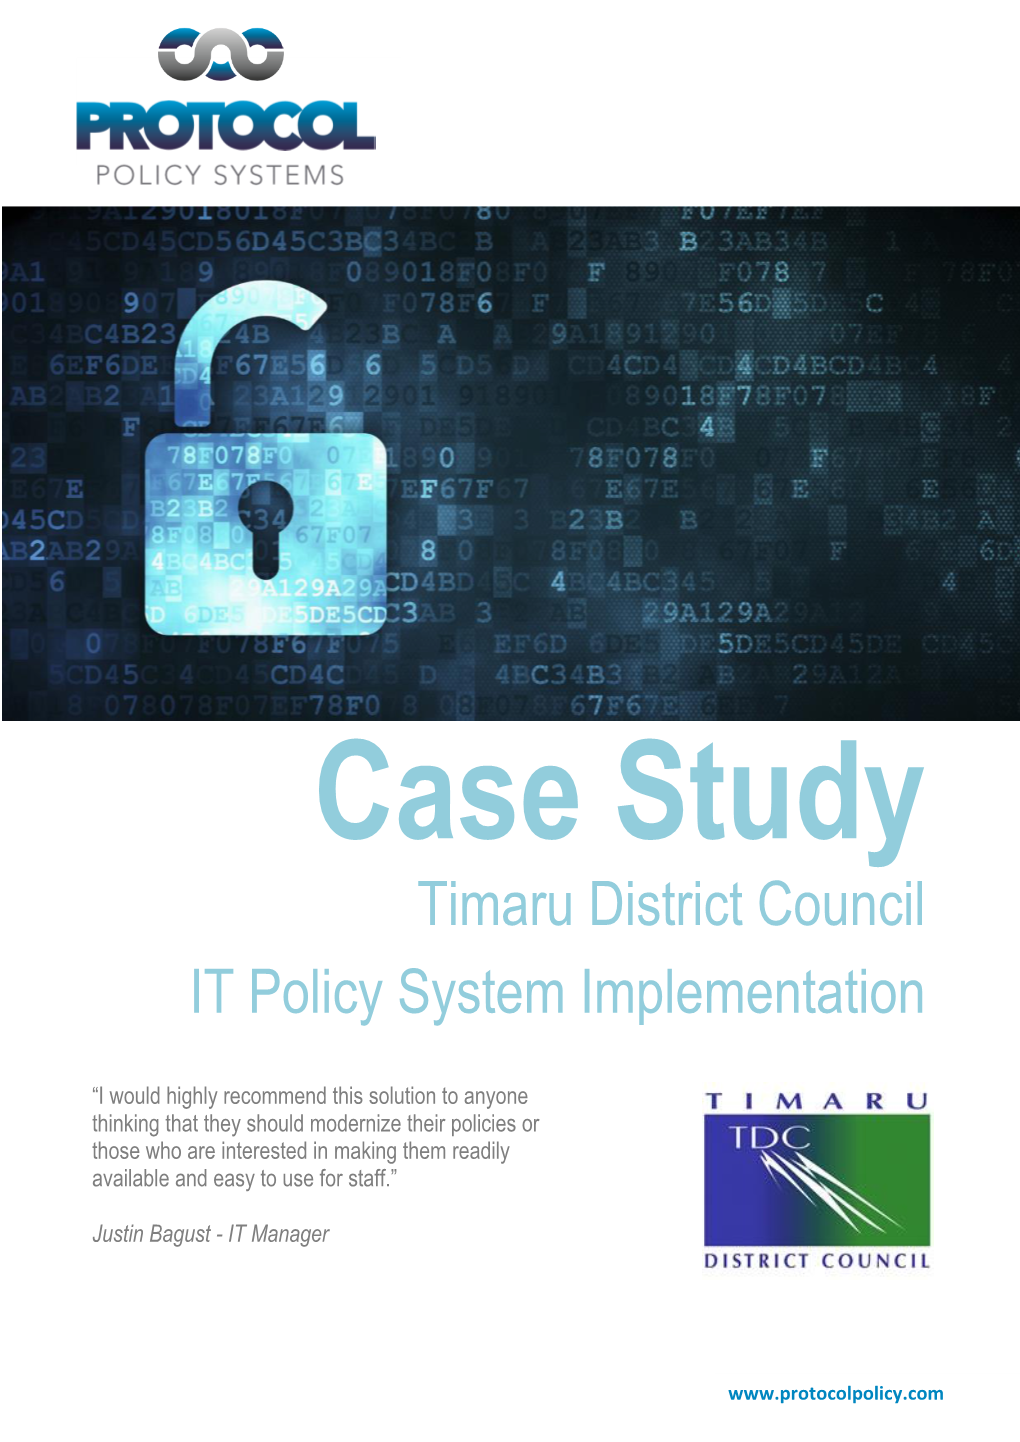 Timaru District Council IT Policy System Implementation